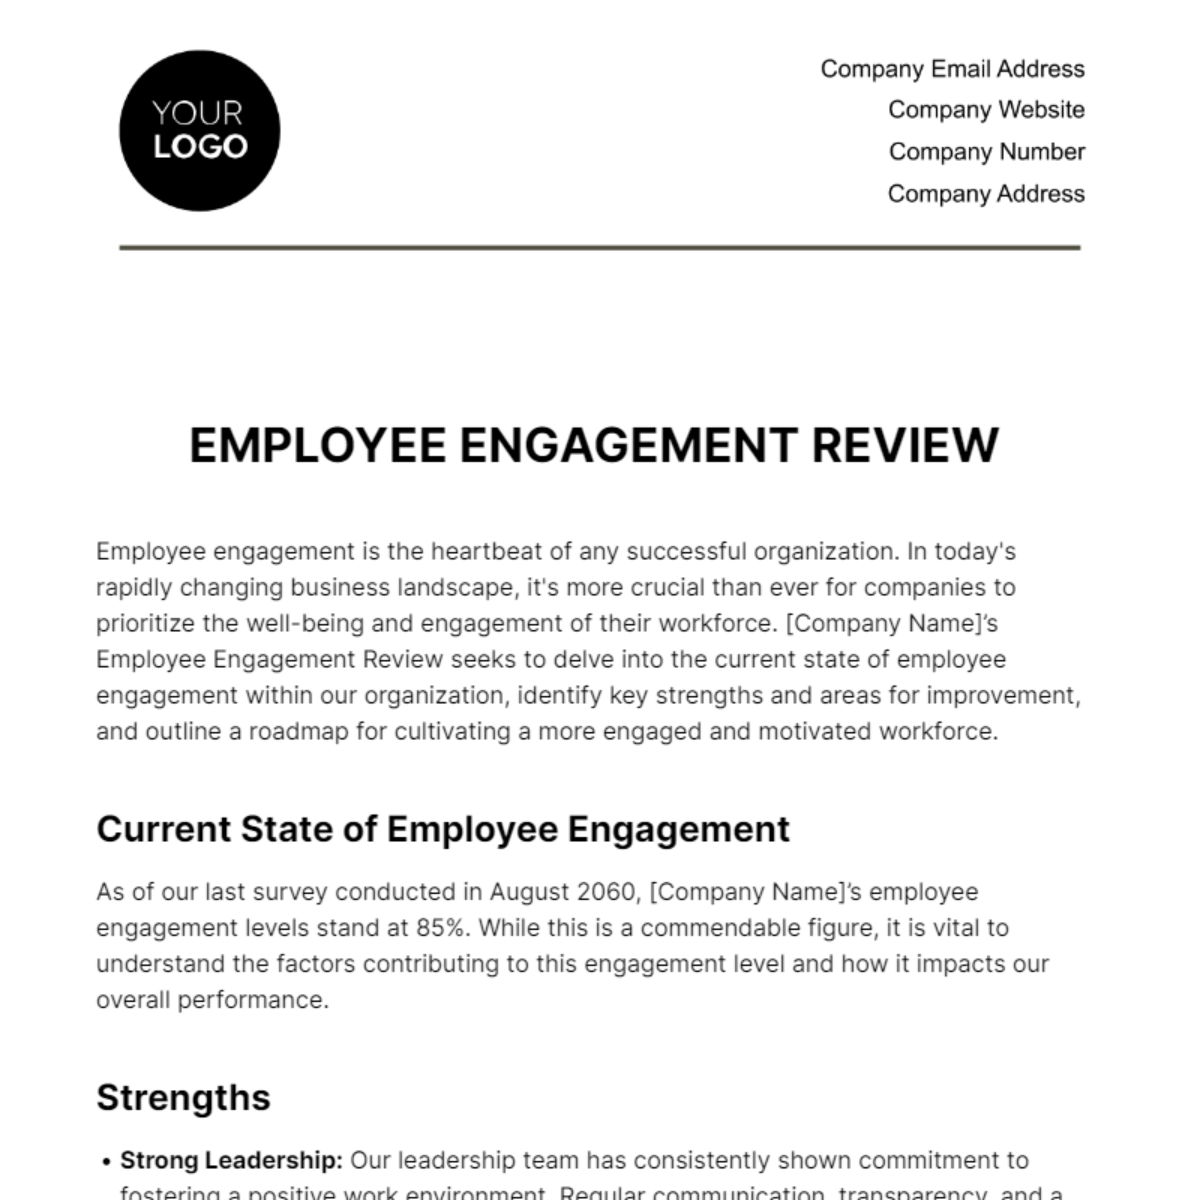 Free Employee Engagement Review HR Template